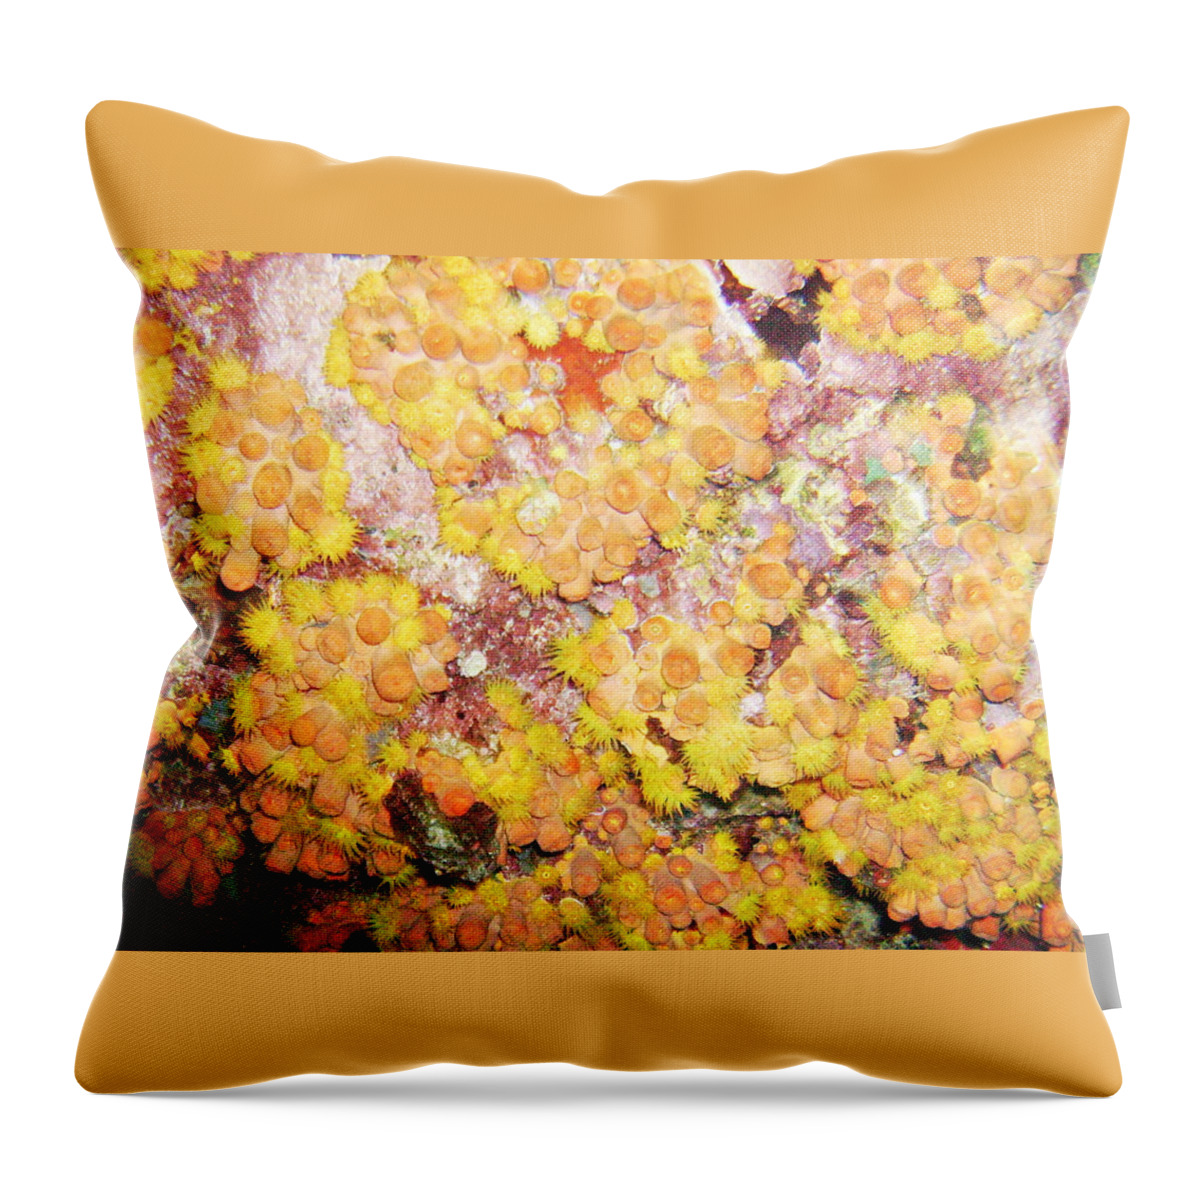 Ocean Throw Pillow featuring the photograph Orange Cups by Lynne Browne